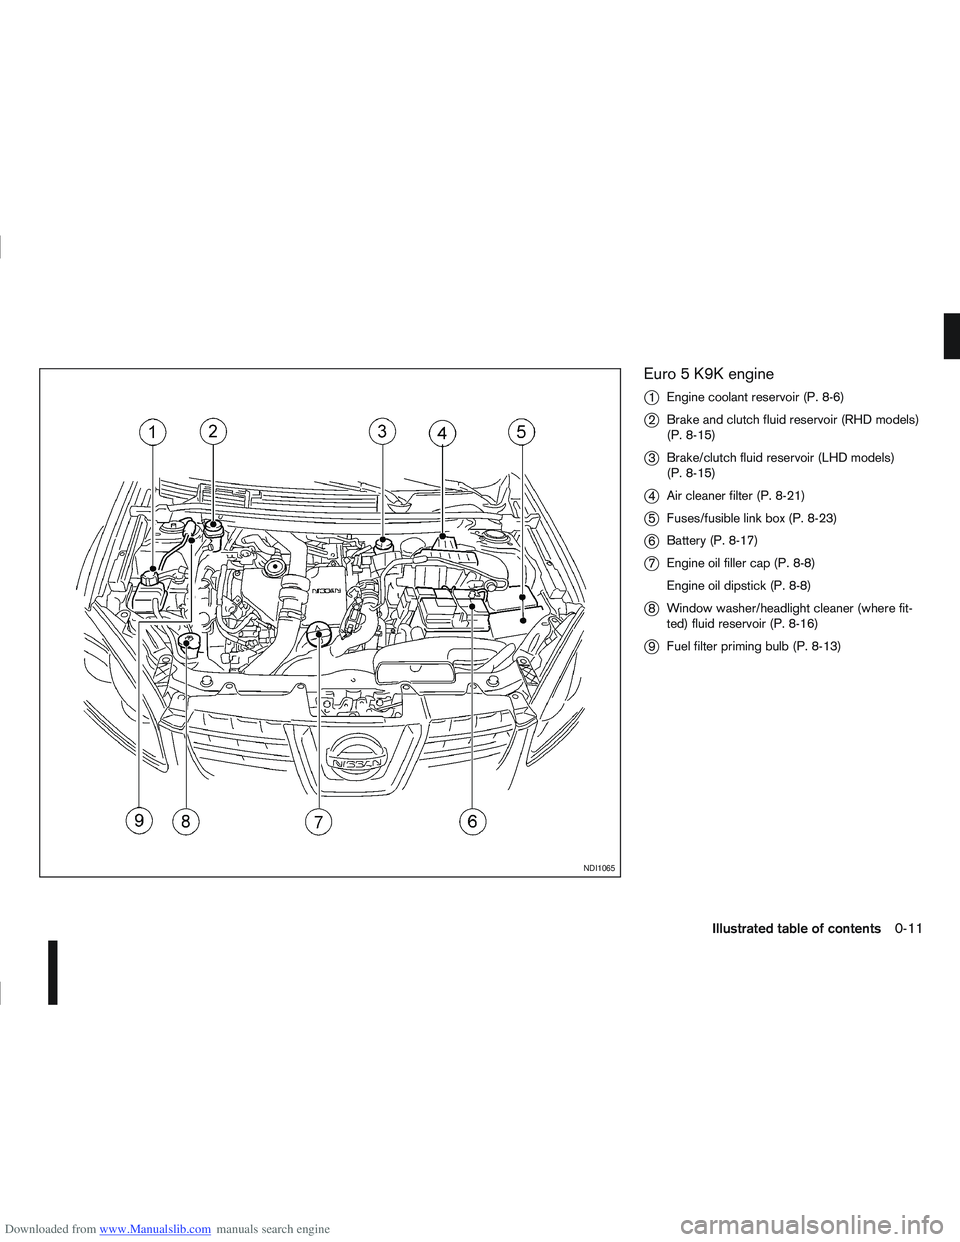 NISSAN QASHQAI 2007  Owners Manual Downloaded from www.Manualslib.com manuals search engine Euro 5 K9K engine
j
1Engine coolant reservoir (P. 8-6)
j2Brake and clutch fluid reservoir (RHD models)
(P. 8-15)
j3Brake/clutch fluid reservoir